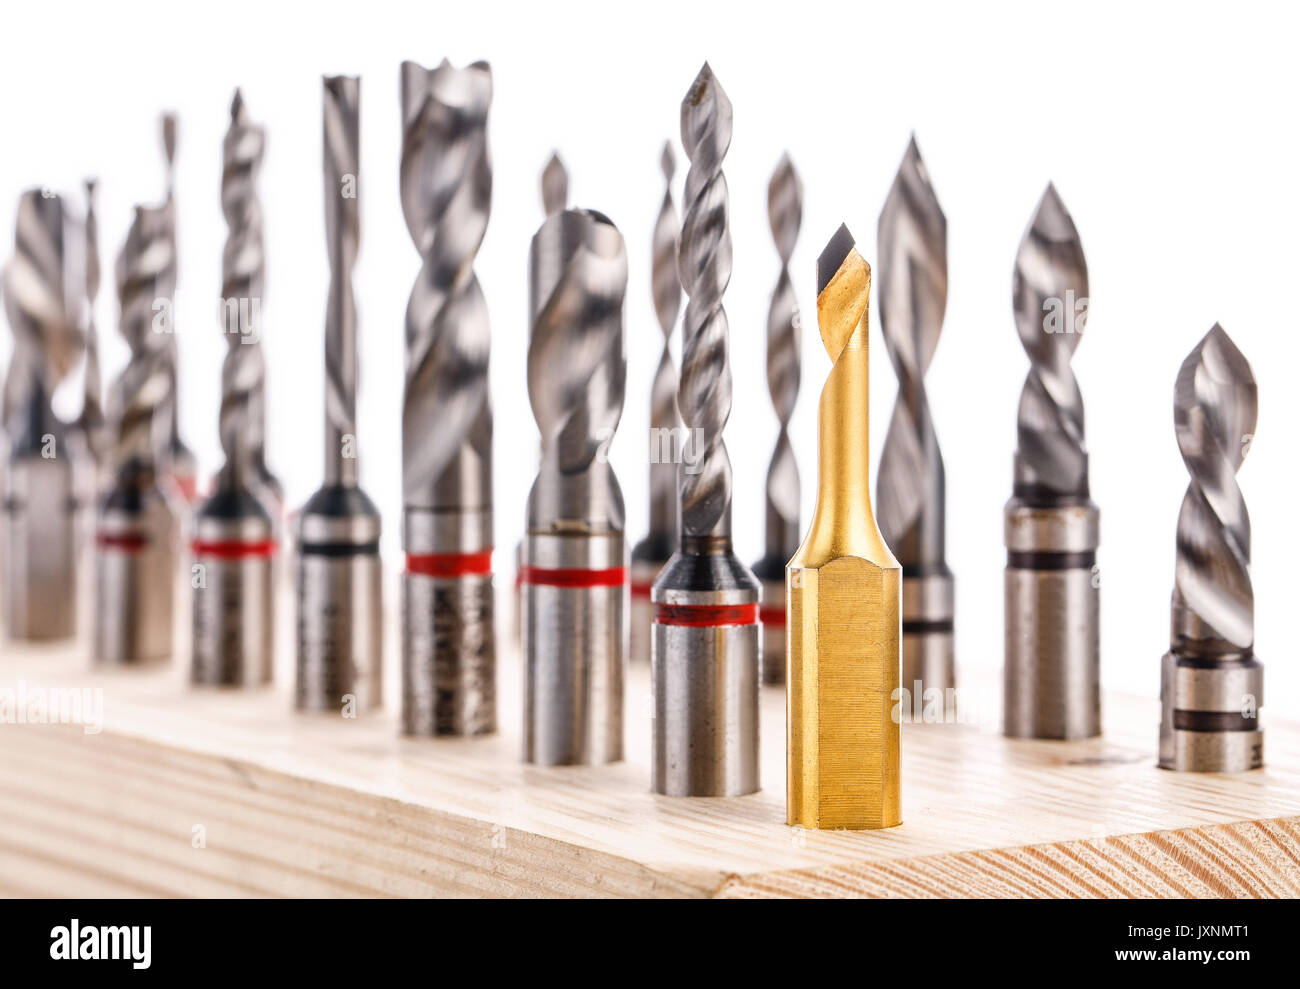 set of different drill bits for wood standing on wooden stand Stock Photo